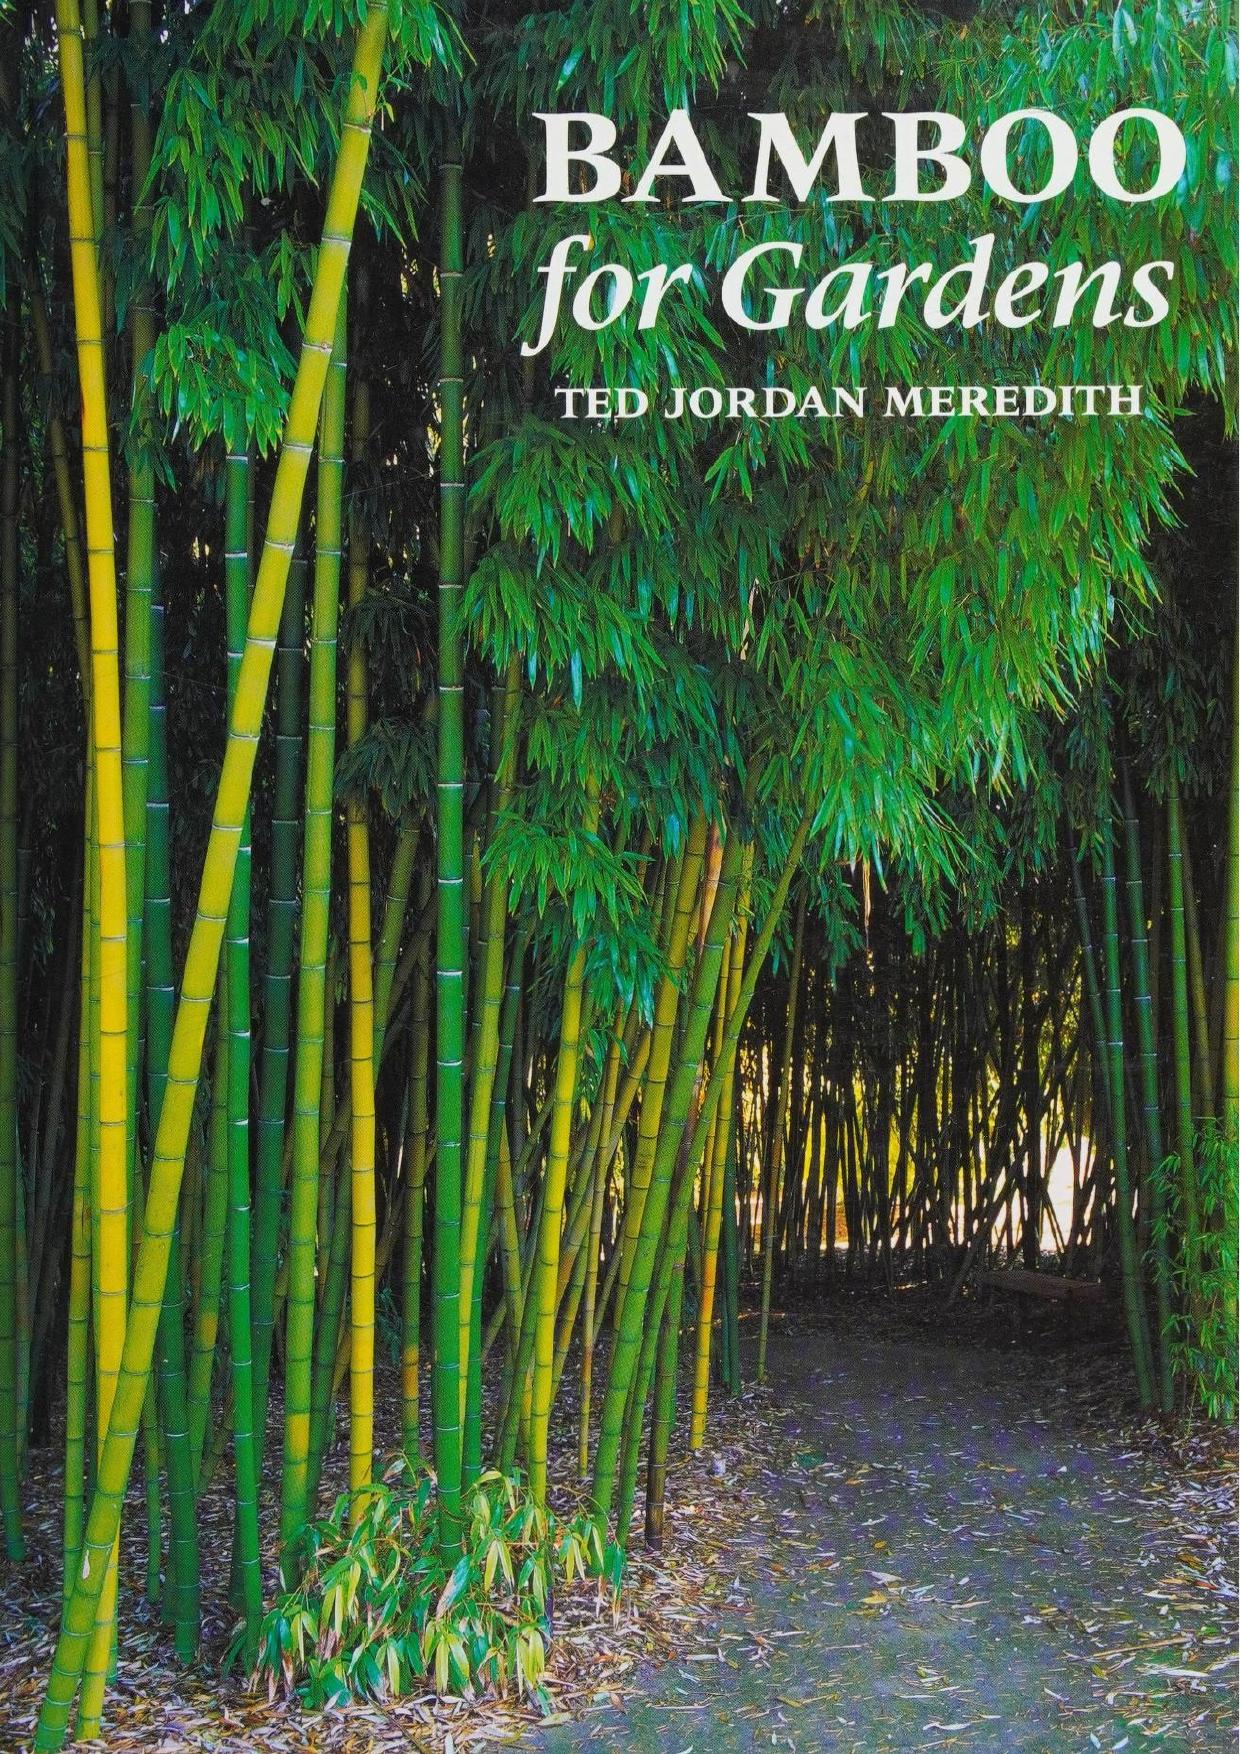 Bamboo for Gardens by Ted Jordan Meredith